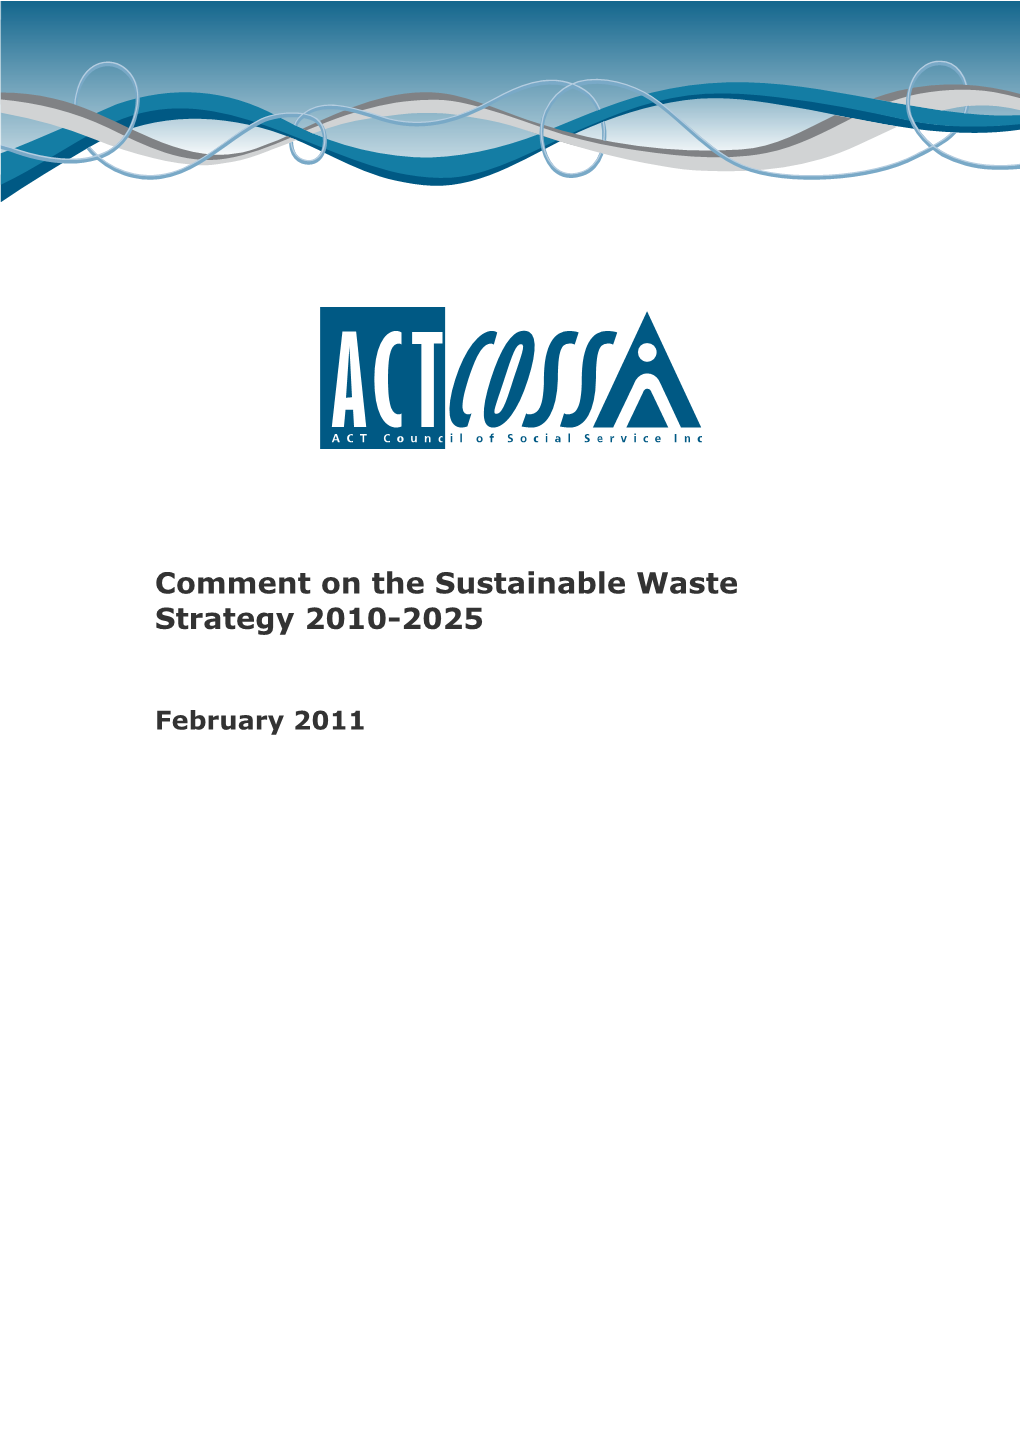 Comment on the Sustainable Waste Strategy 2010-2025